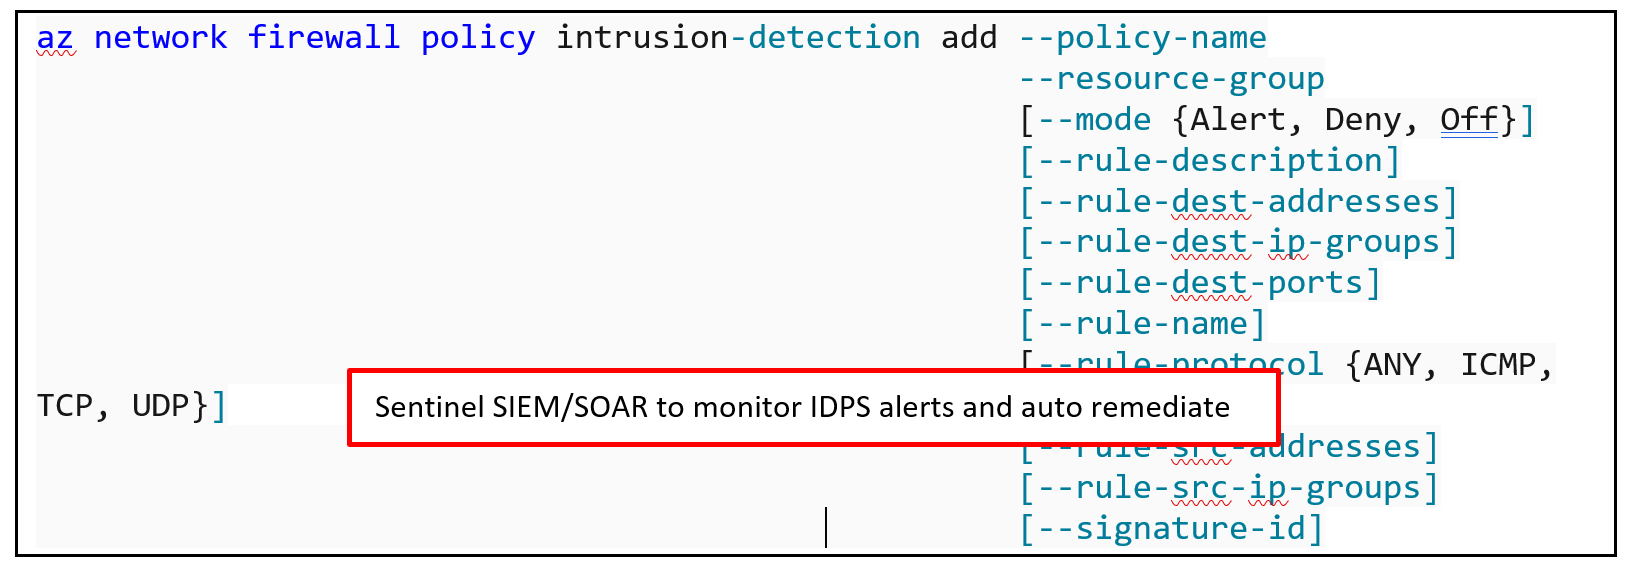 image shows how to add override intrusion signature or a bypass rule for intrusion detection using CLI